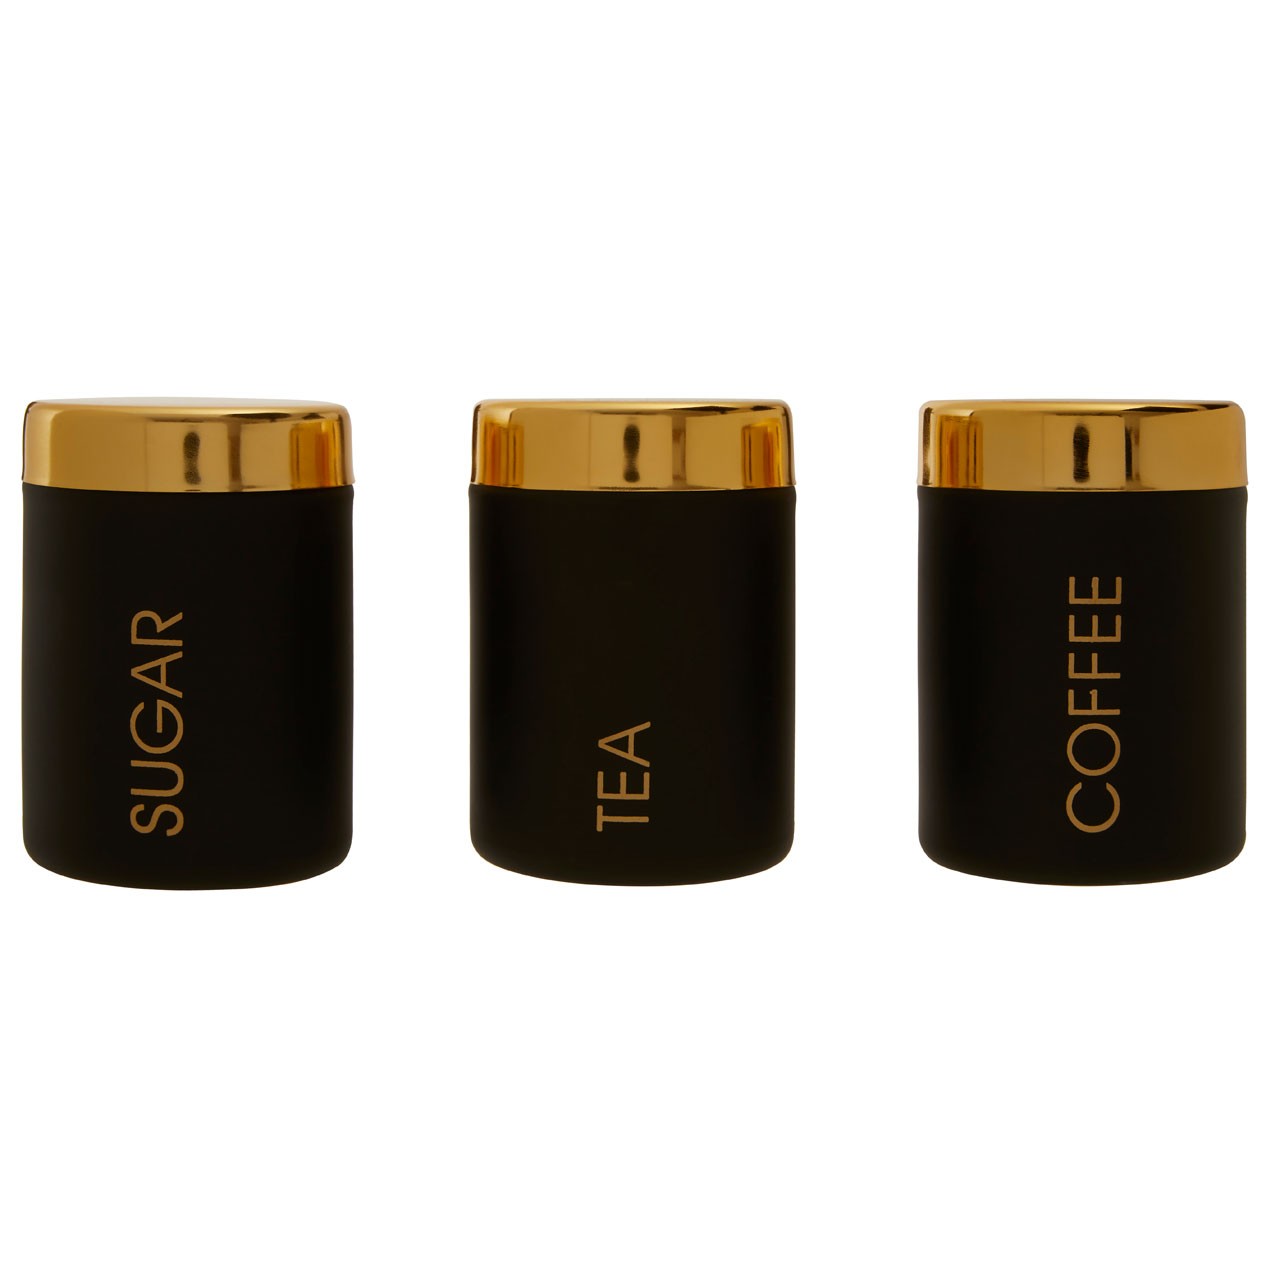 Liberty Set of 3 Black and Gold Canisters Jars for Food Storage